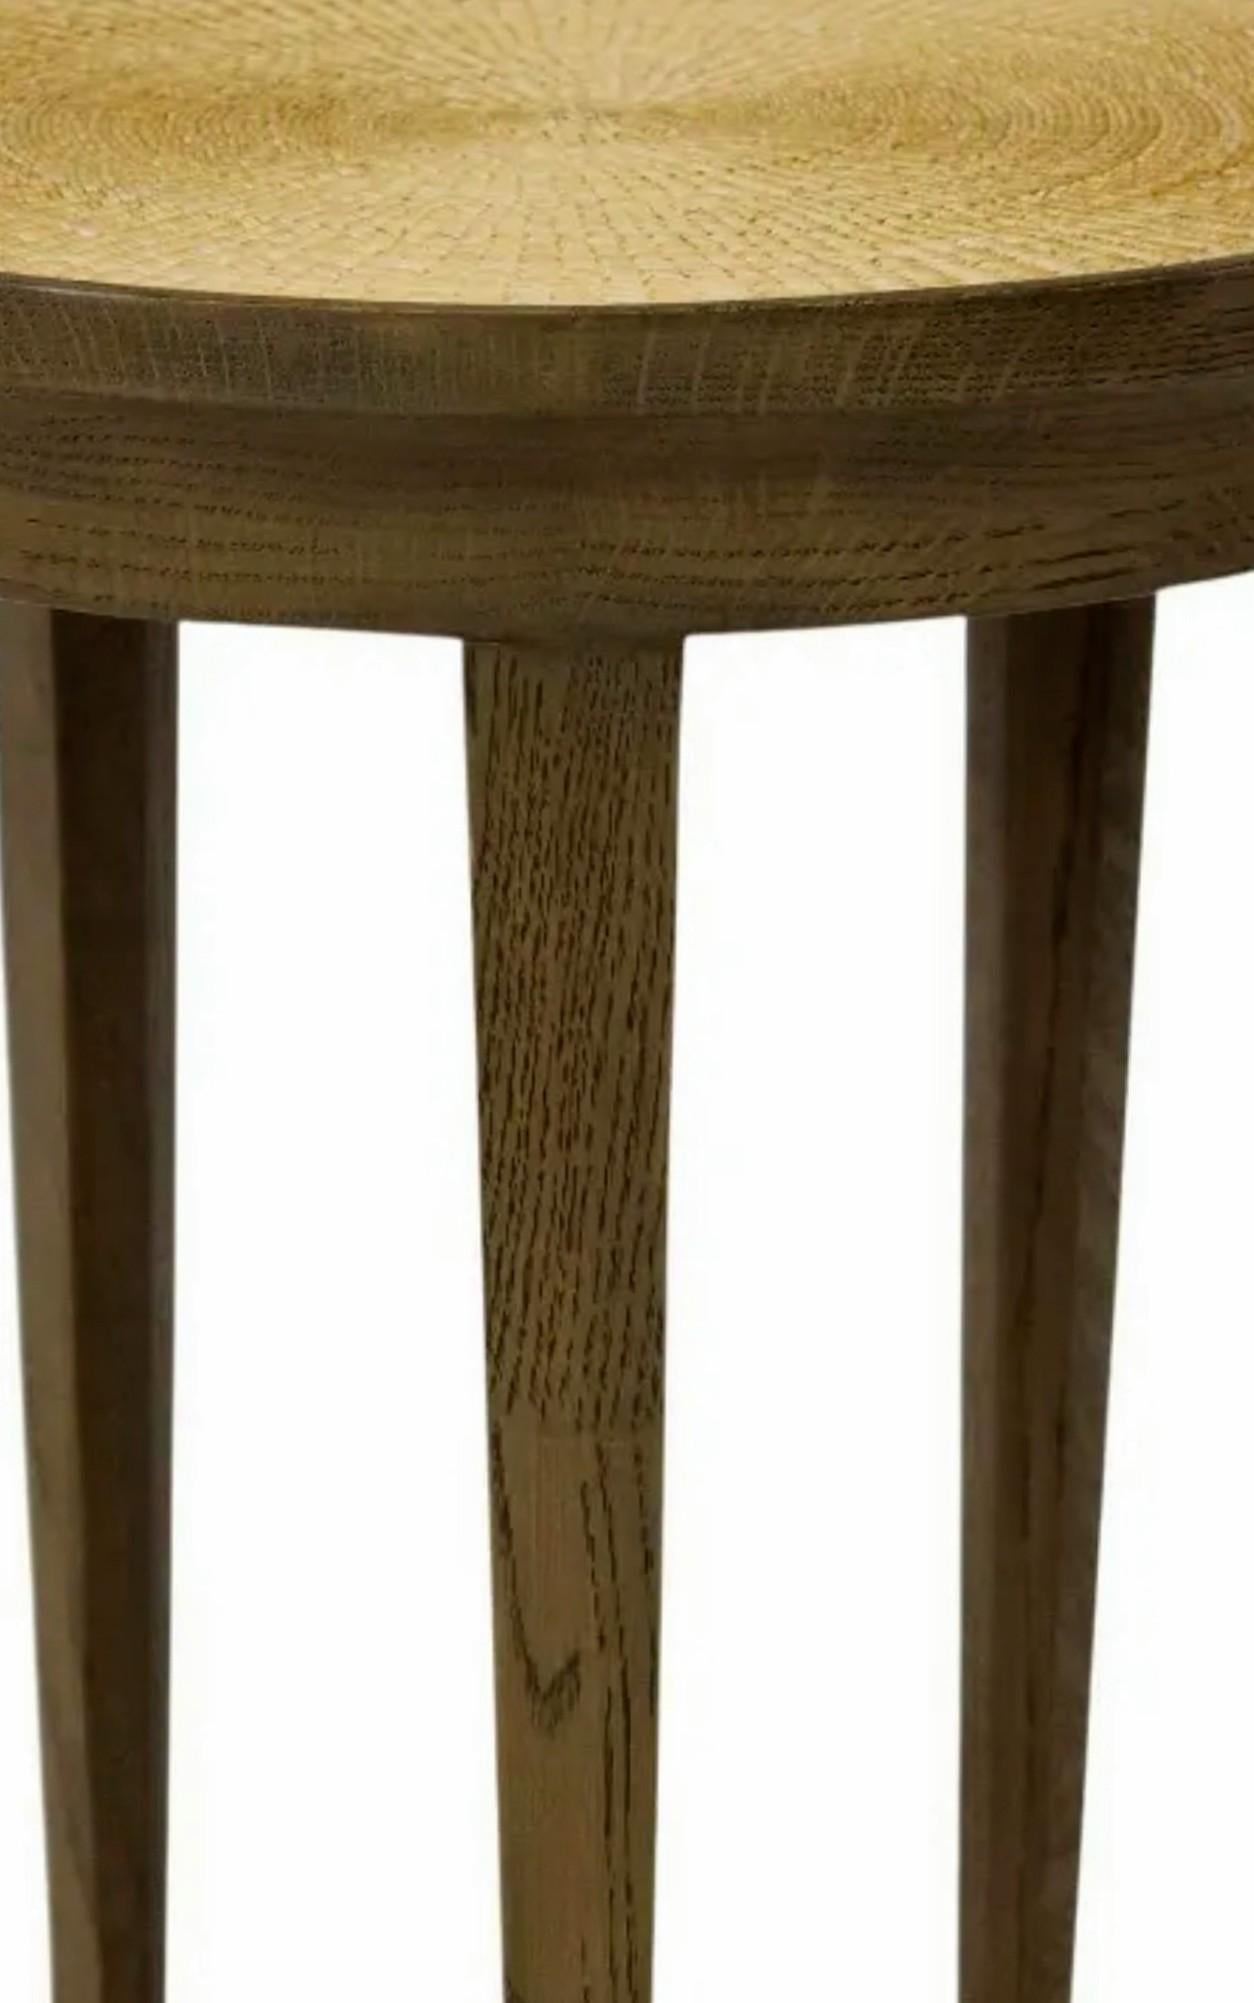 Five Leg Painted Wood & Wicker Occasional Table In Good Condition For Sale In Forney, TX